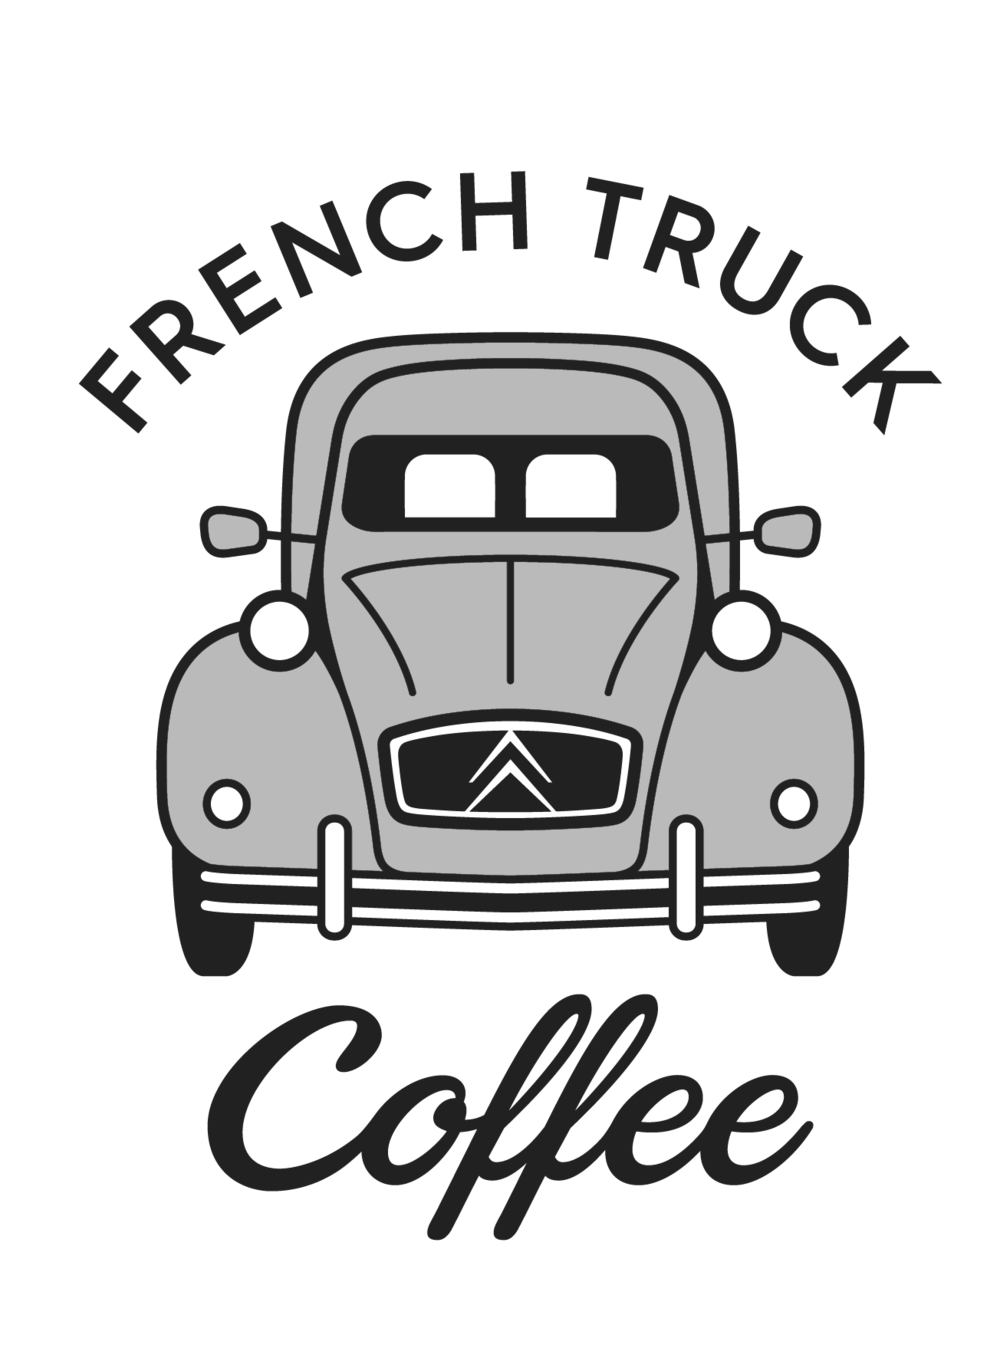 The Shop - French Truck Coffee at the Shop at the CAC